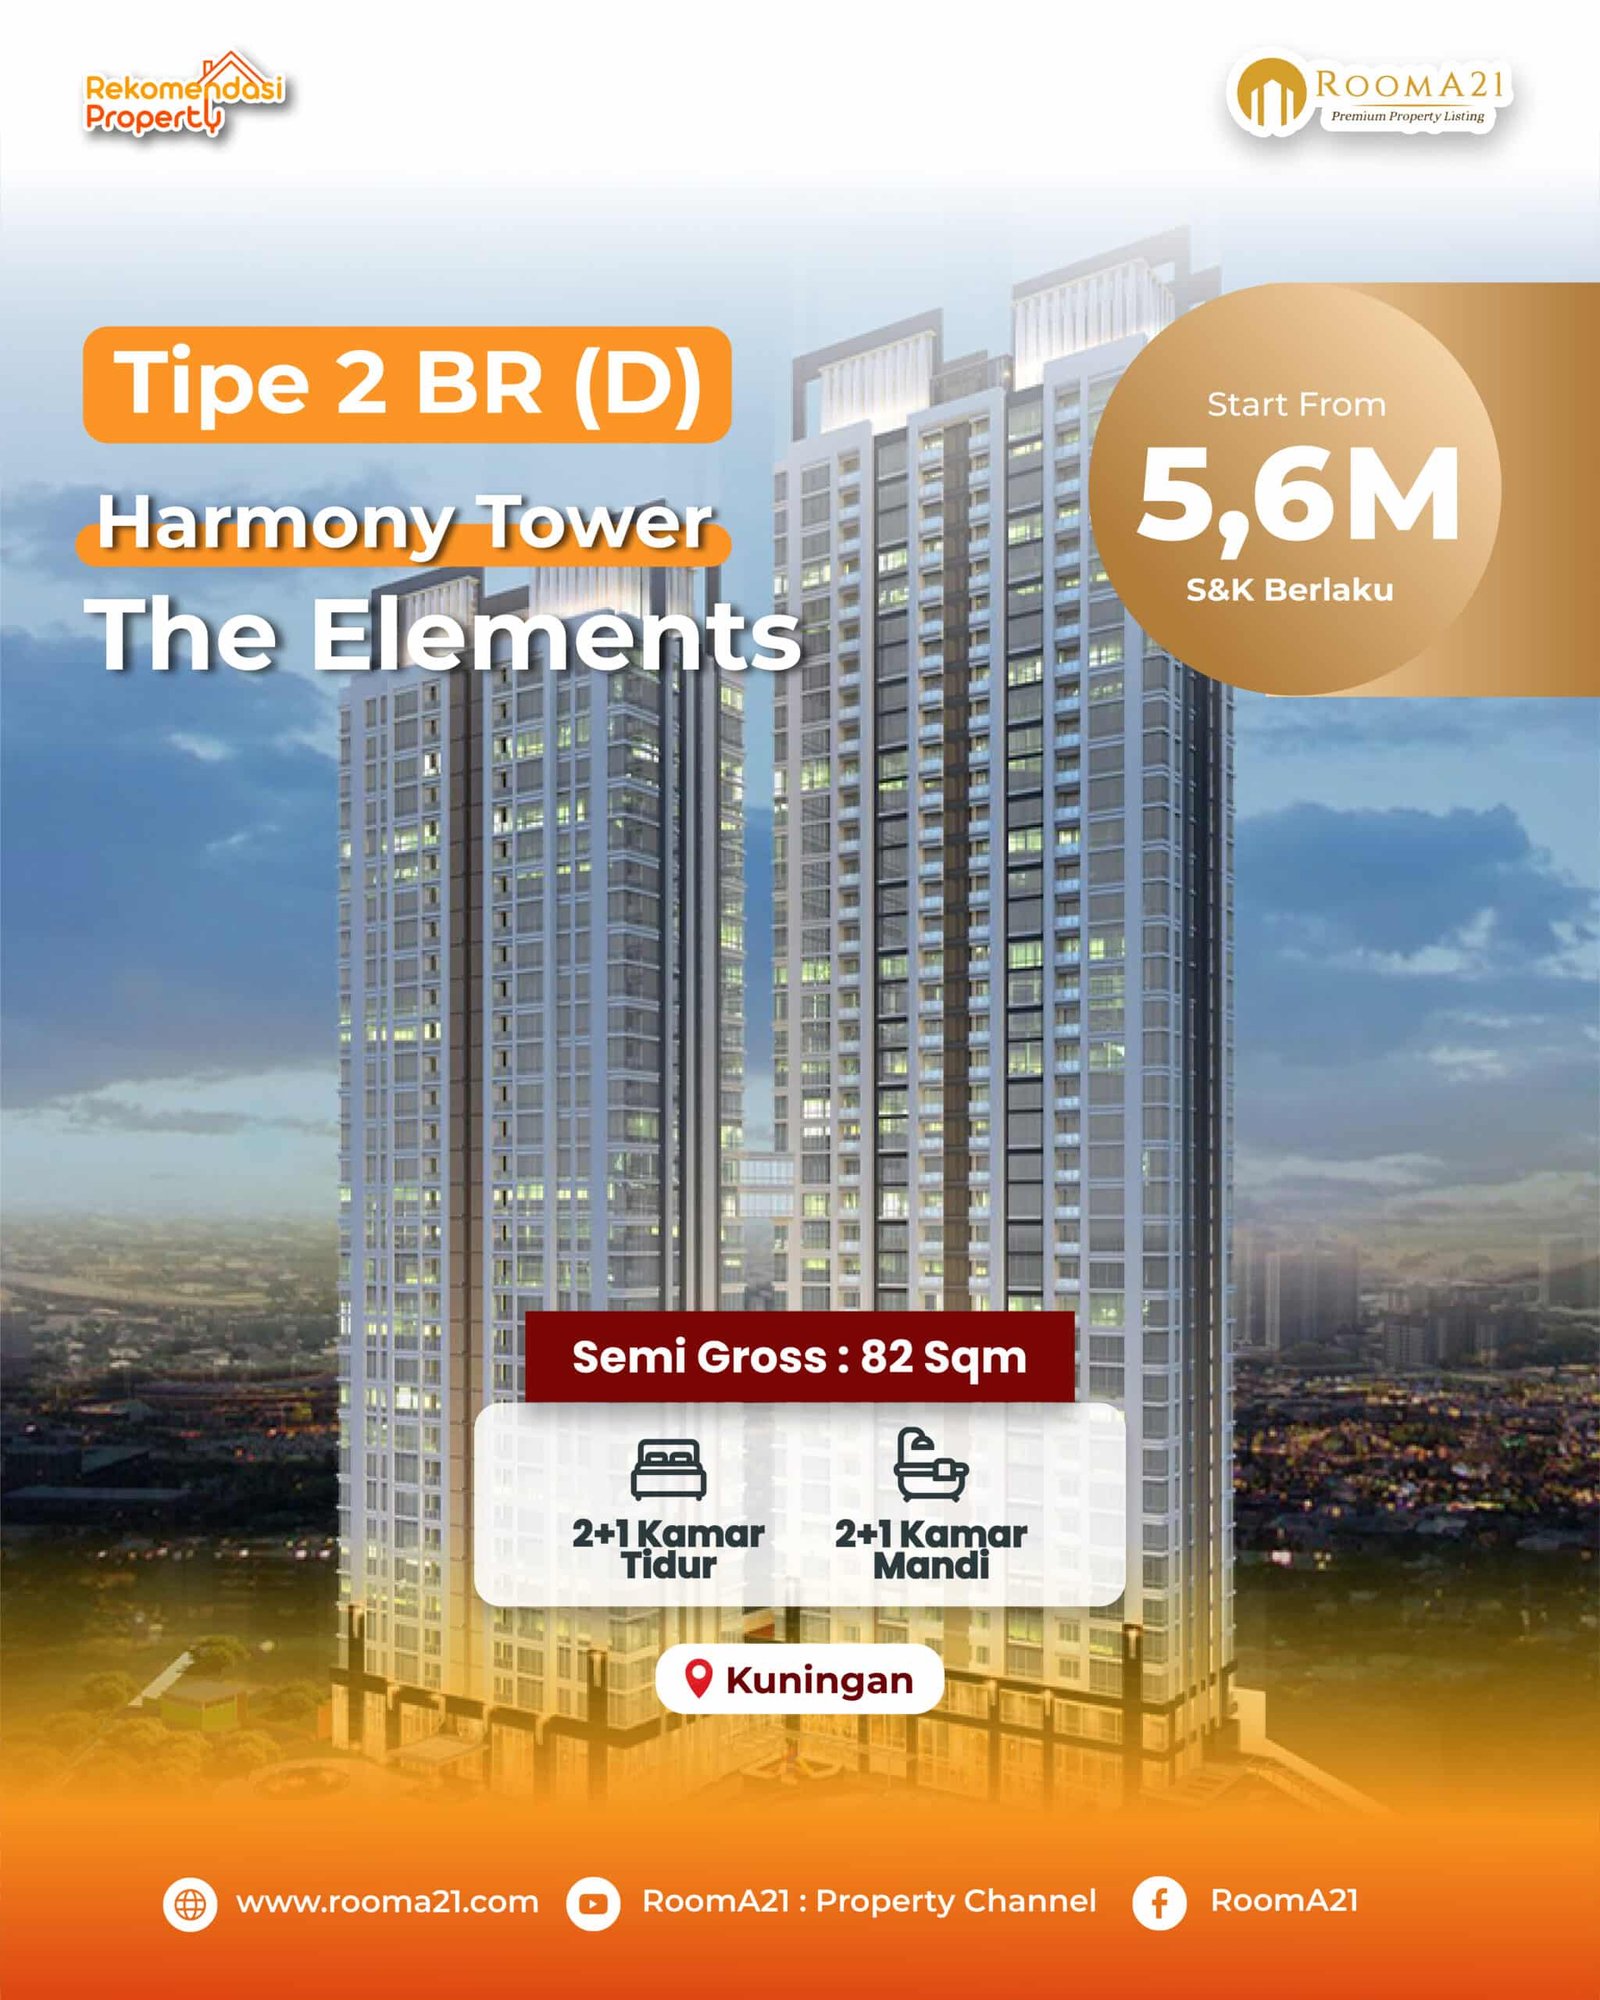 The Elements | Tower Harmony | Tipe 2 BR (D)